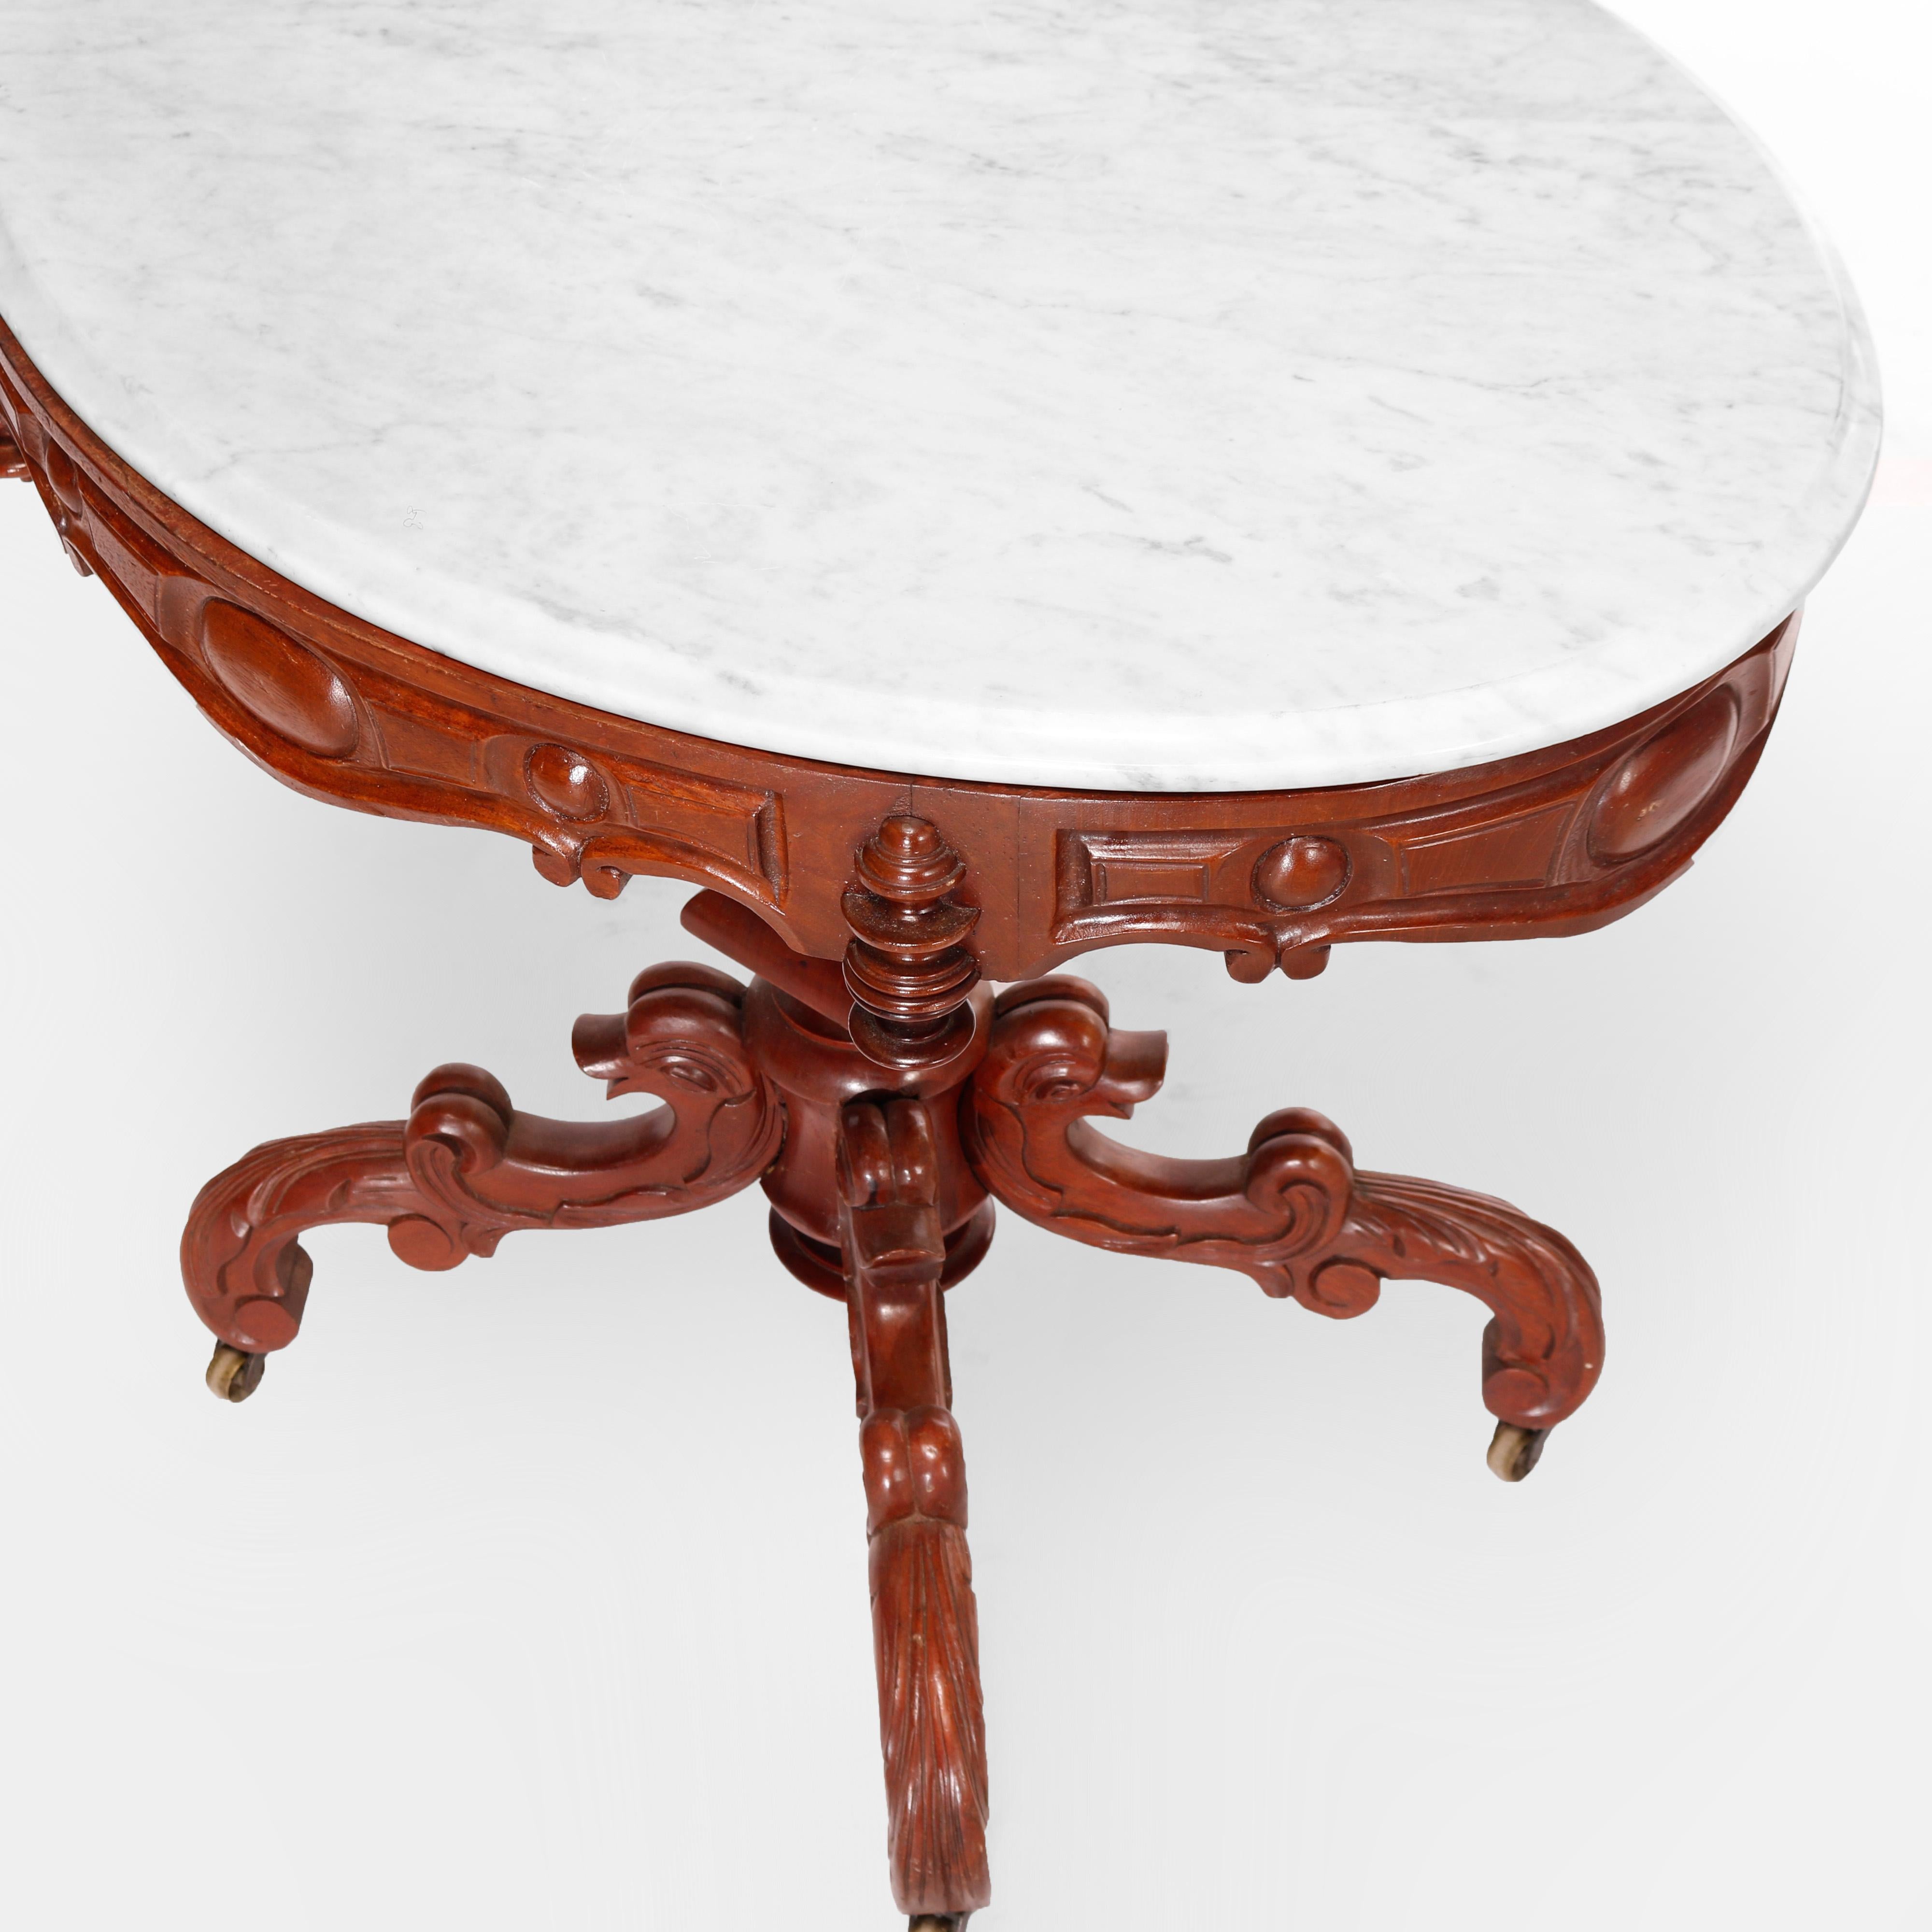 Antique Renaissance Revival Figural Carved Oval Marble Top Parlor Table, c1880 In Good Condition For Sale In Big Flats, NY